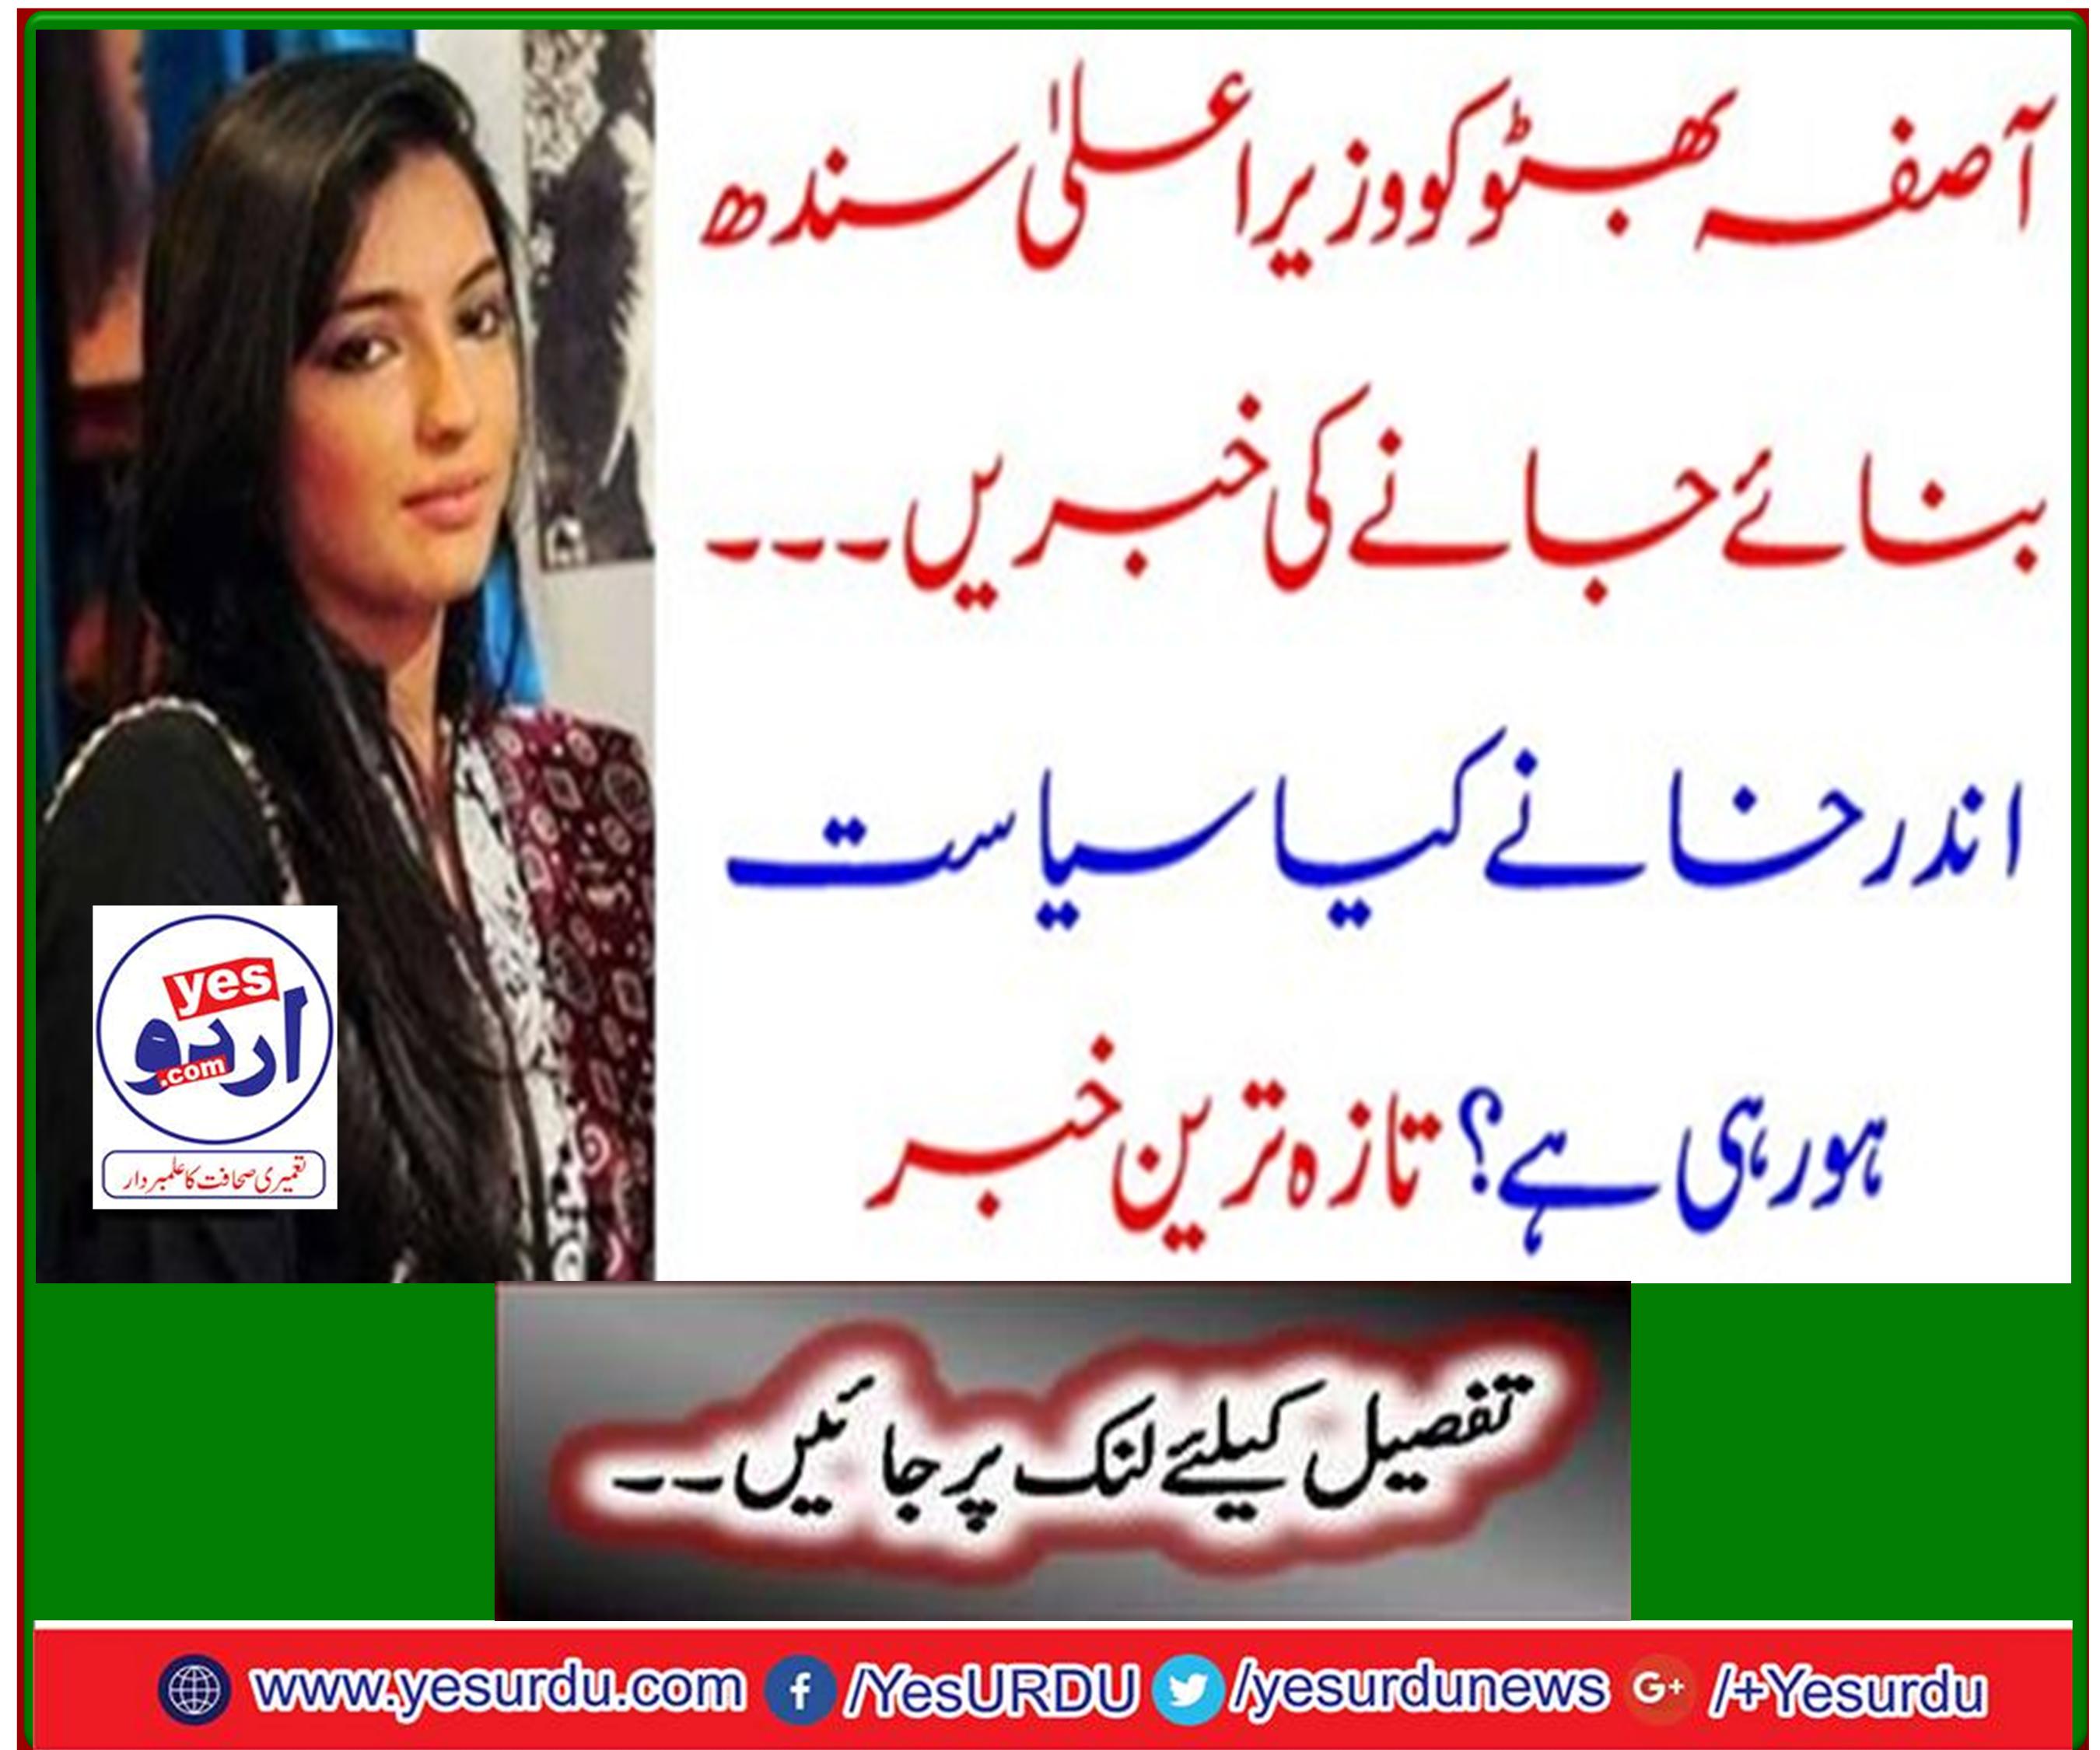 News of Asifa Bhutto being made Chief Minister of Sindh ... What's happening inside politics? Latest news